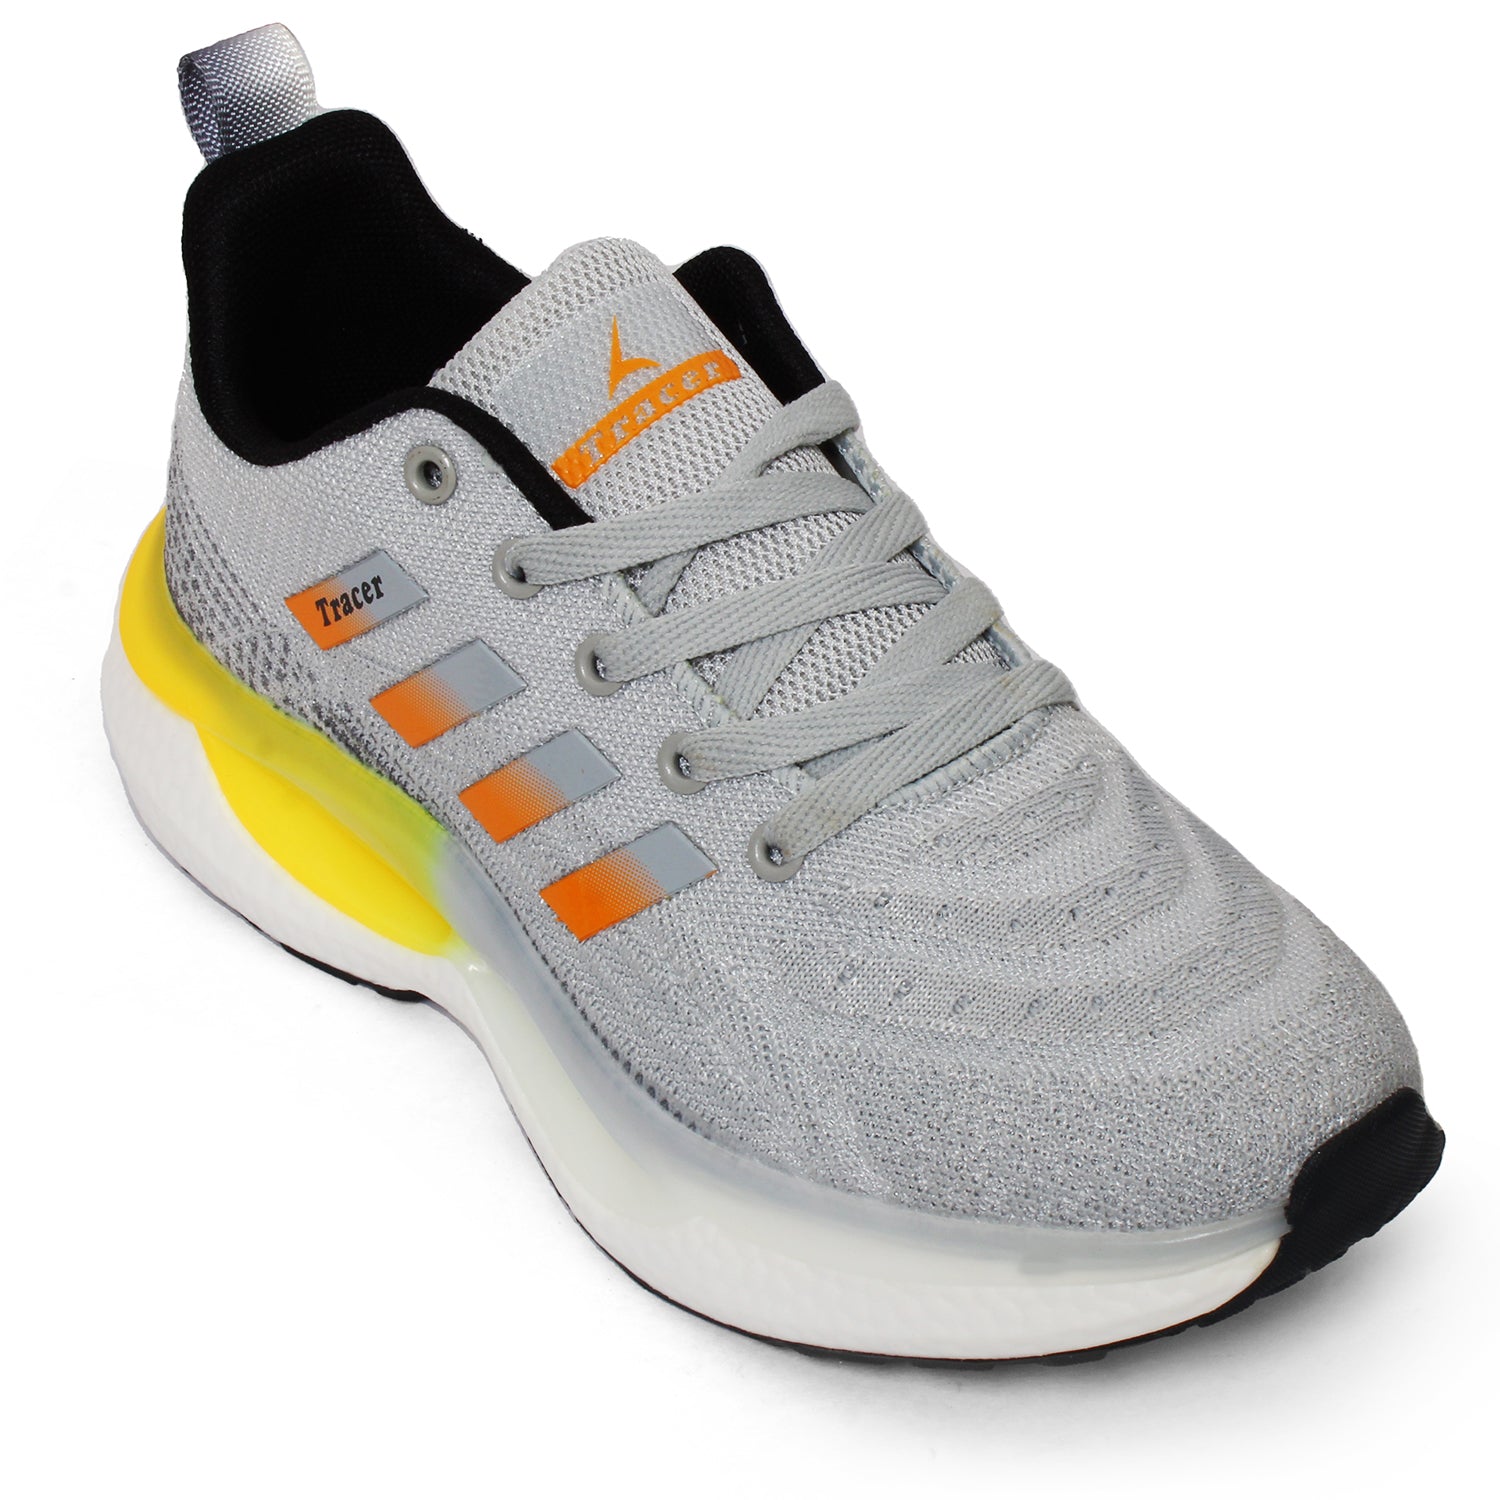 Tracer Conquer 2625 Men's Sneaker Grey Yellow